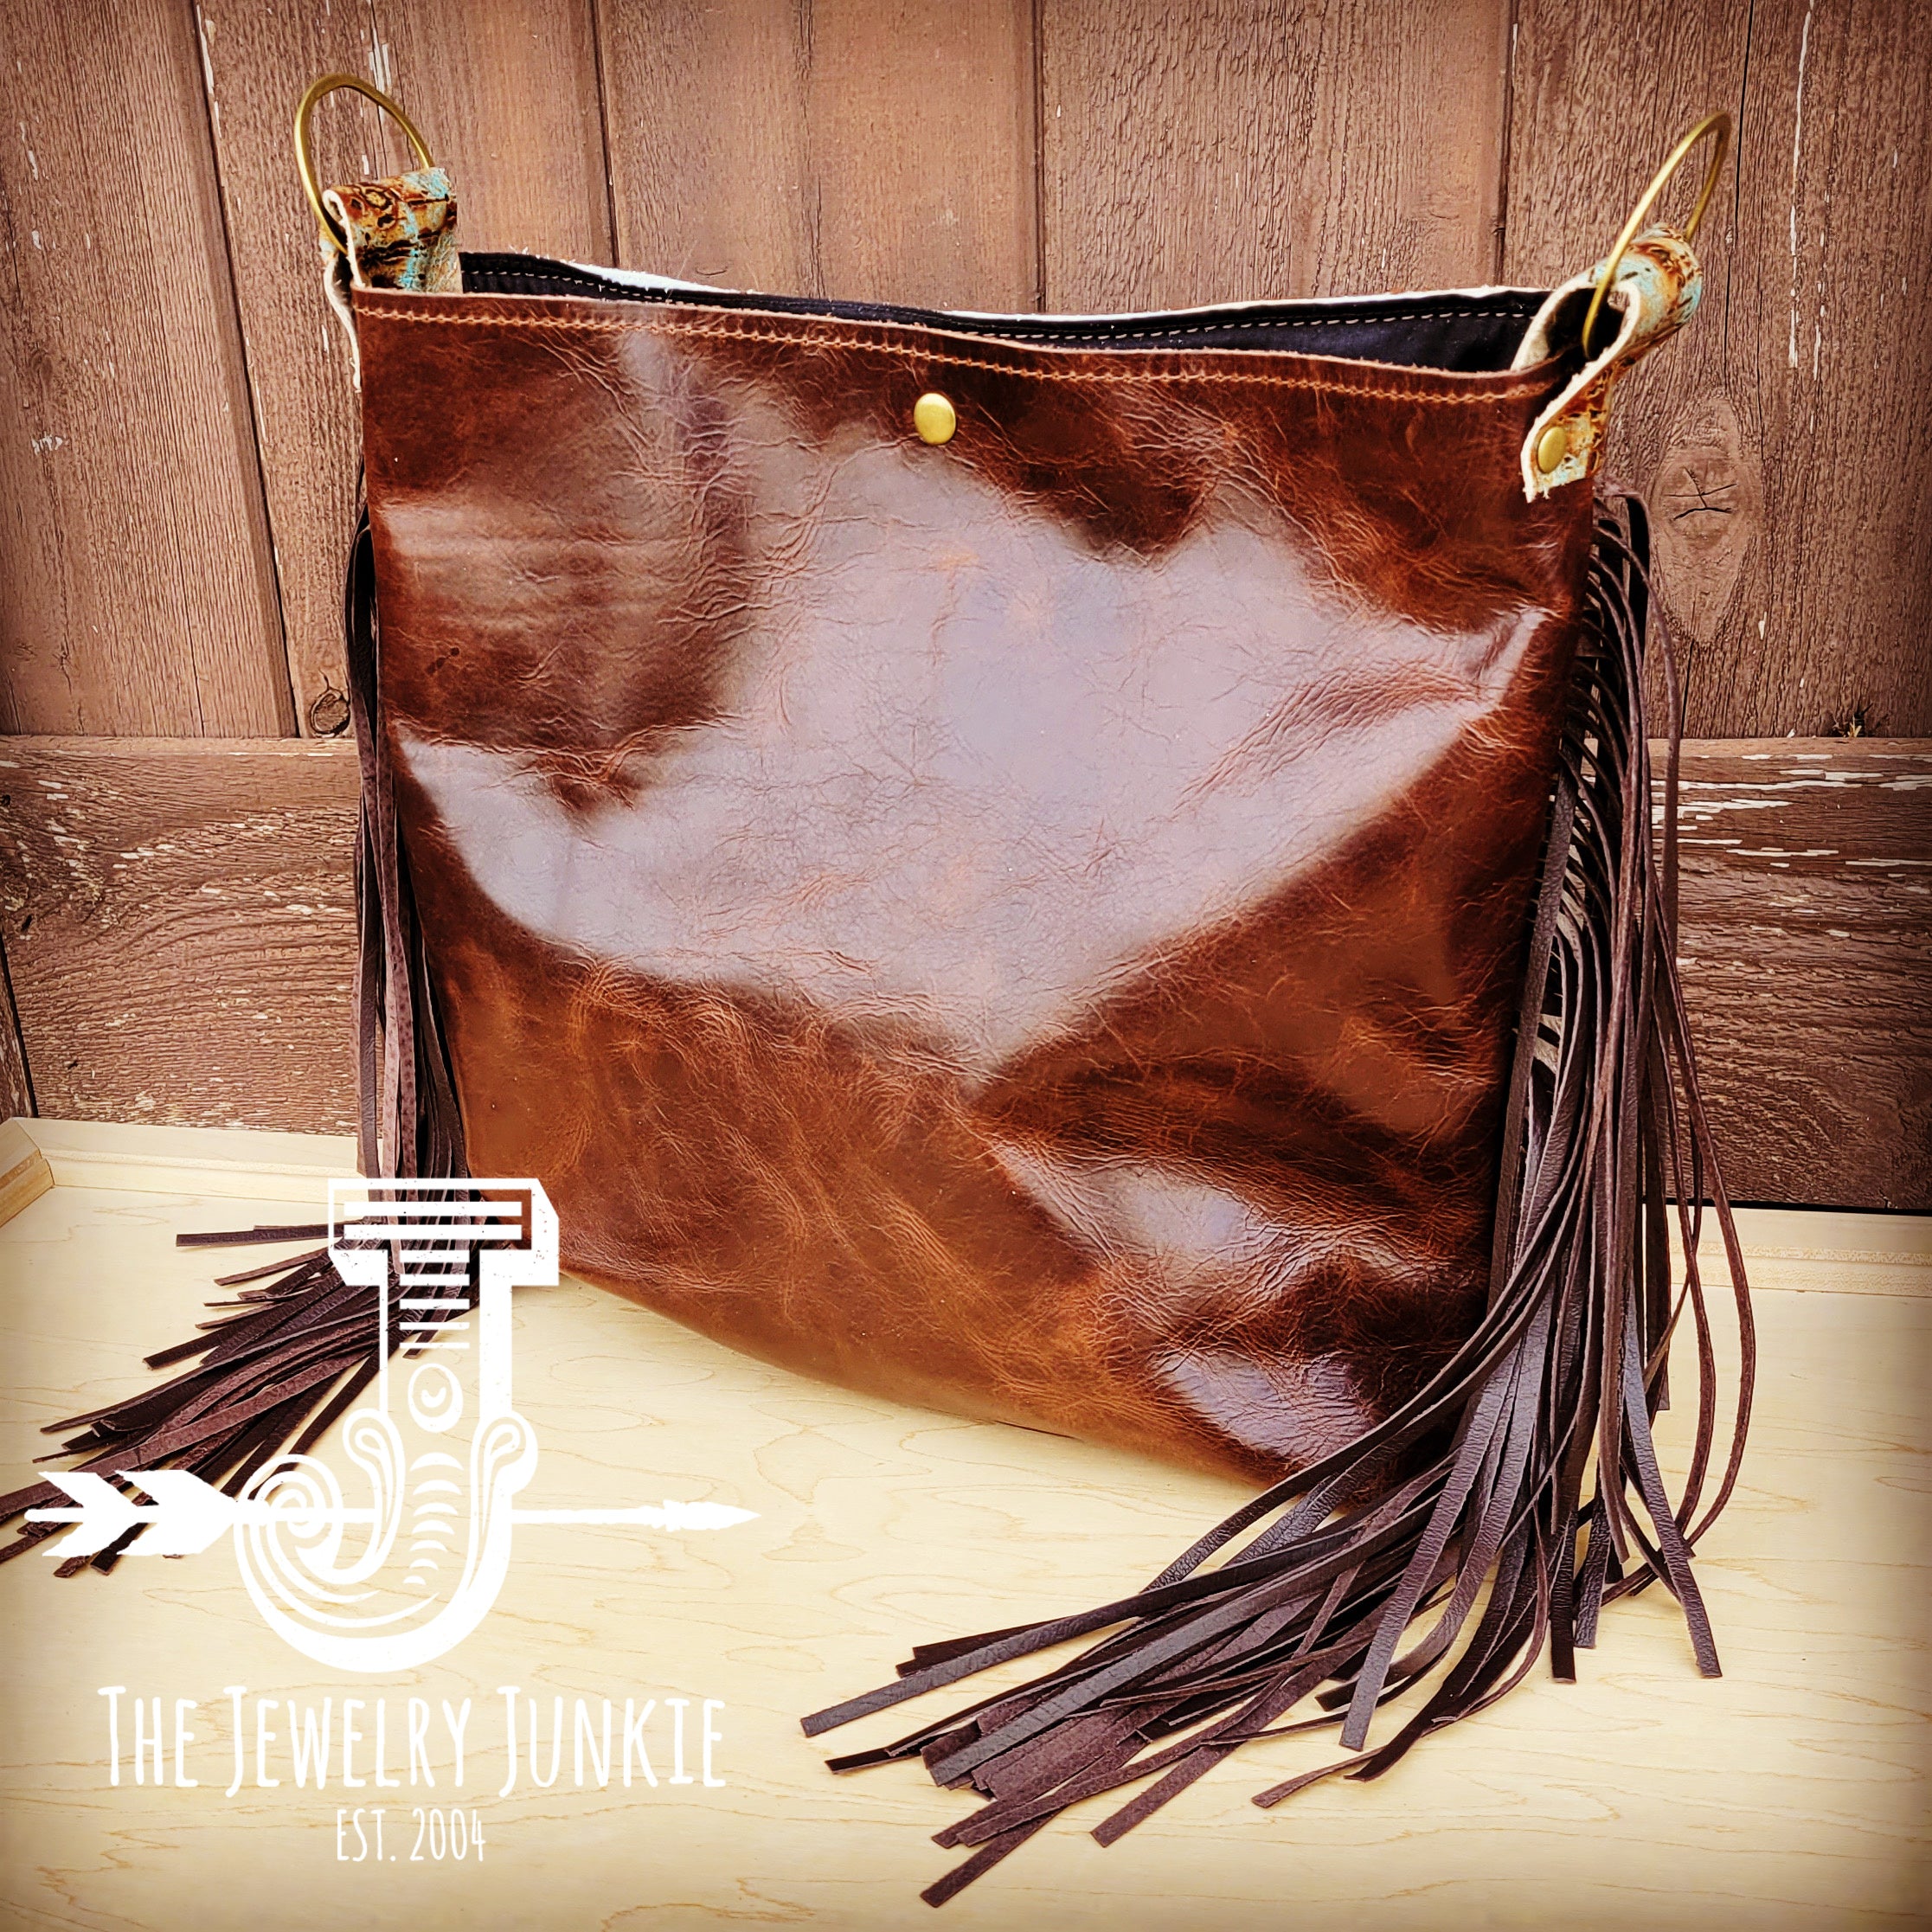 Leather Purse with Fringe - Cowboy Boot Purse with Fringe - Western  Shoulder Bag with Fringe TS286 | Chris Thompson Bags